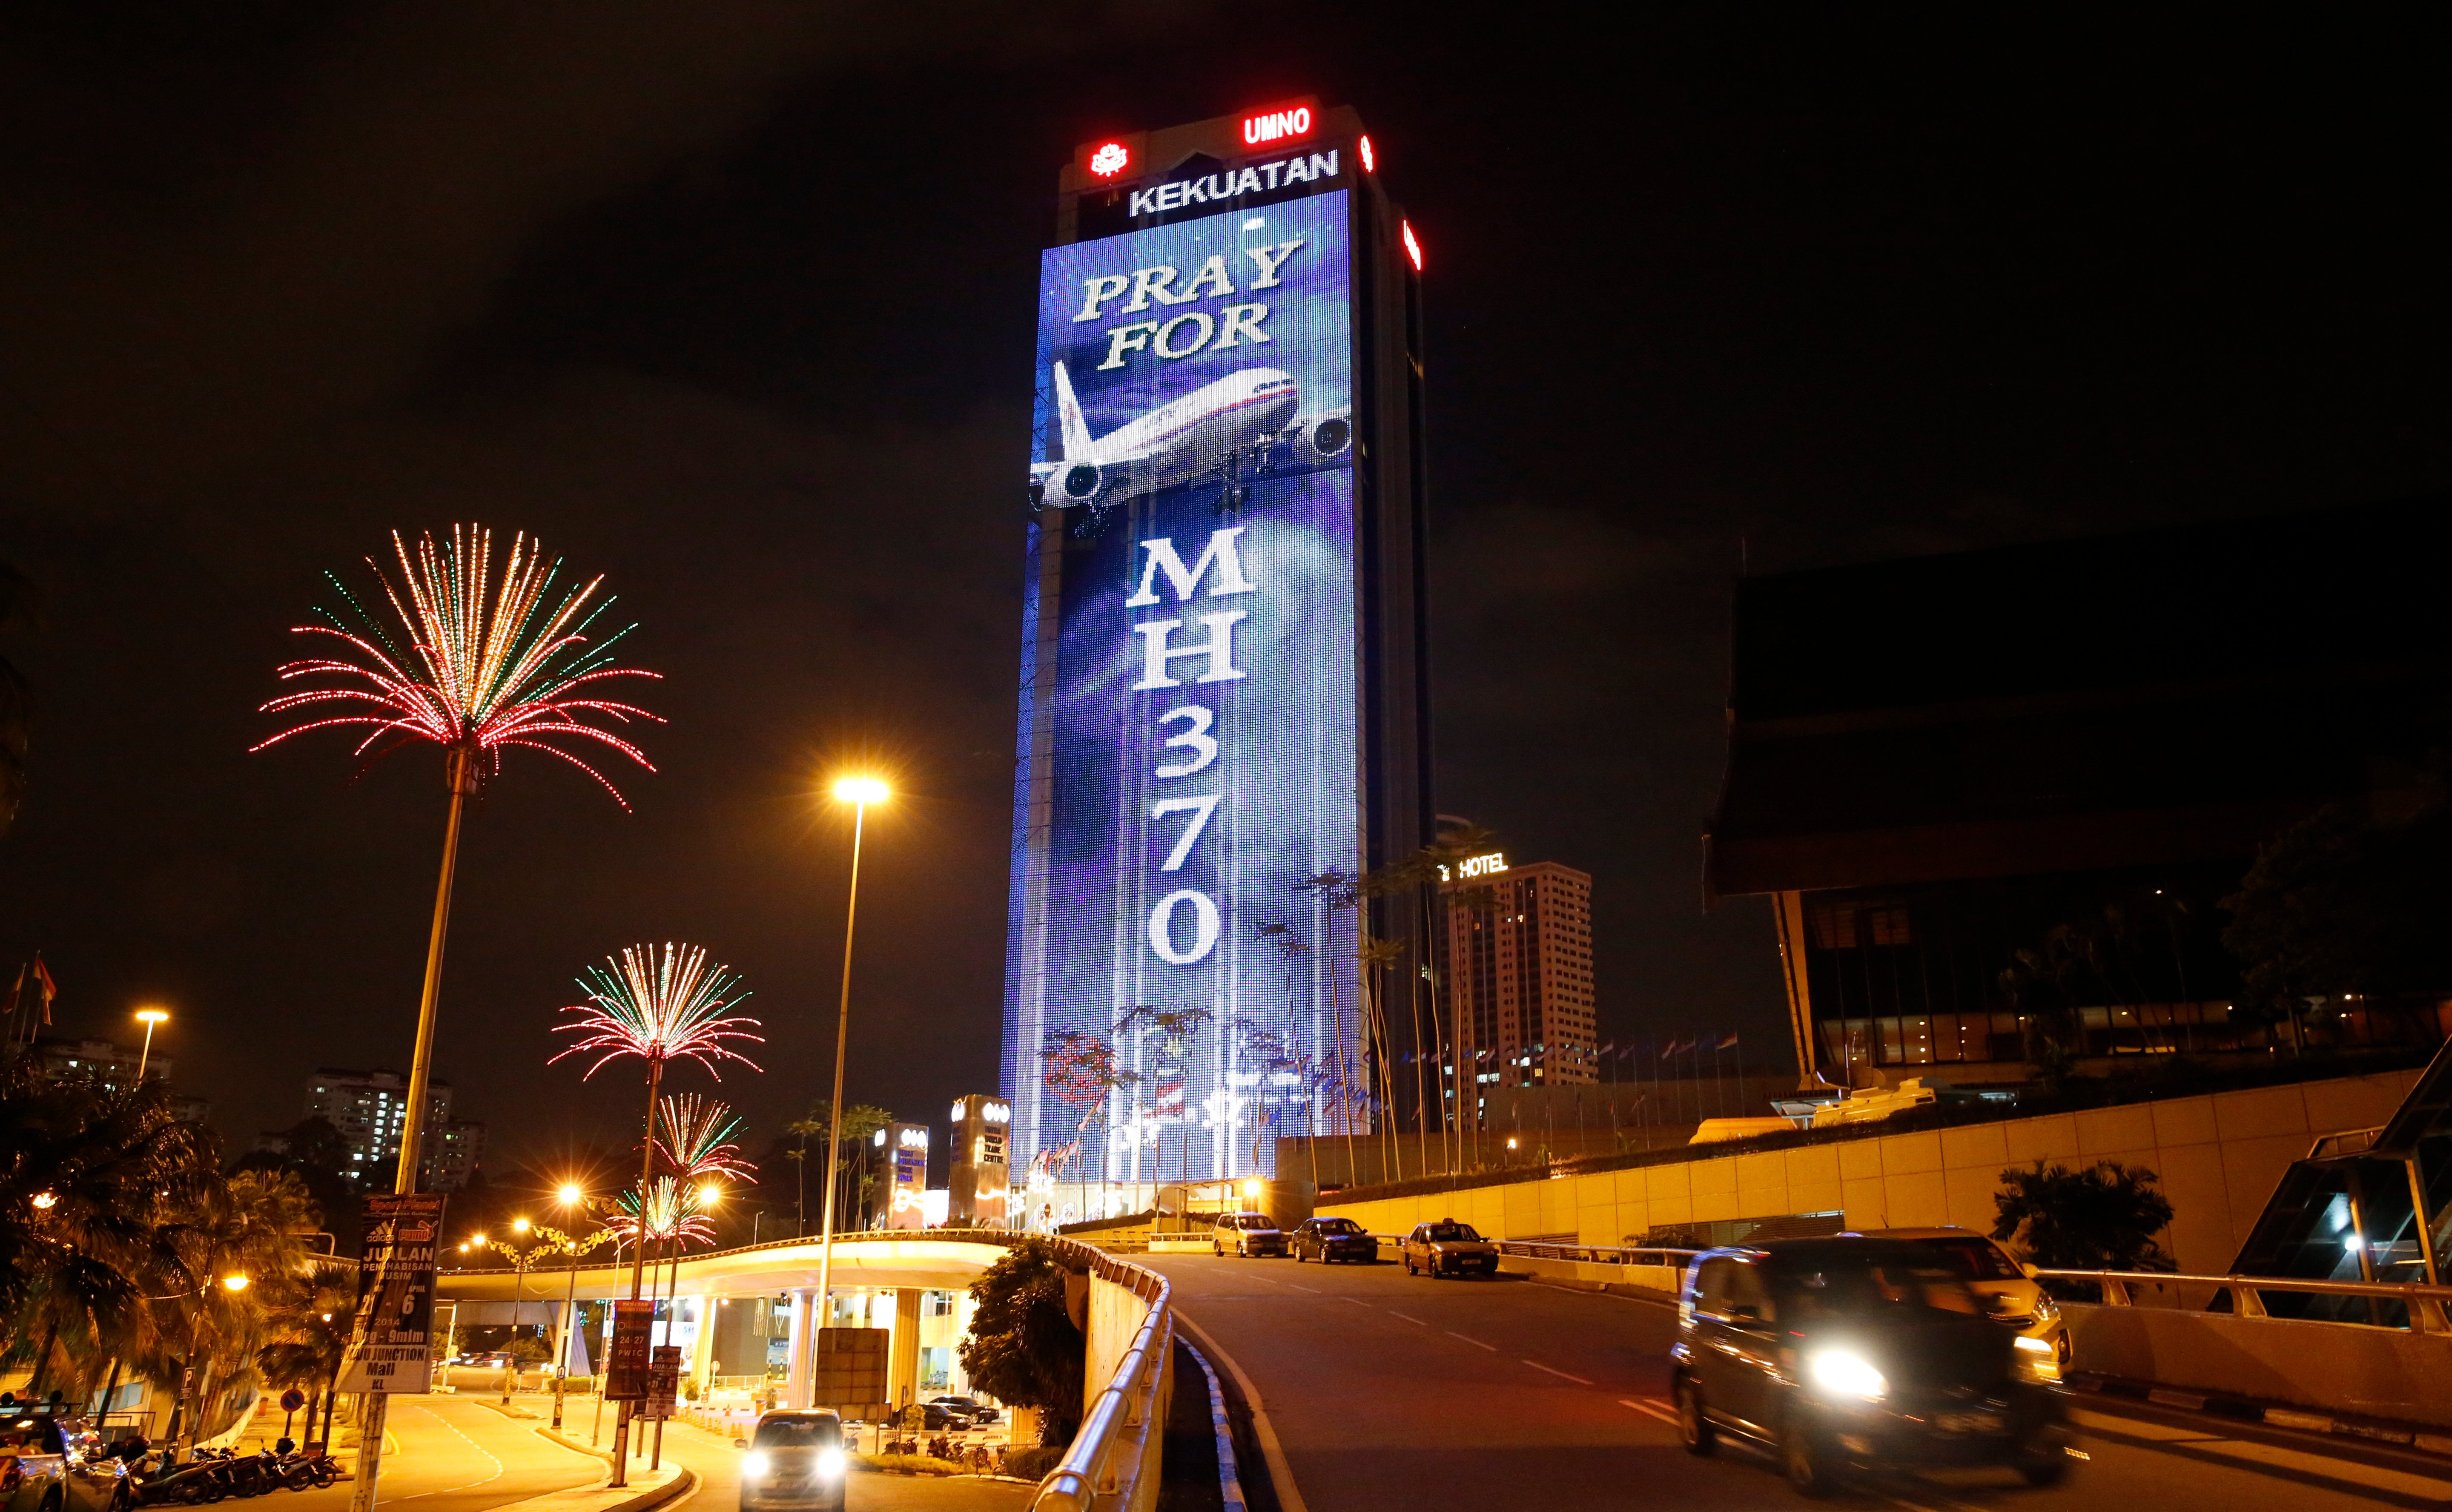 An office building is illuminated with lights displaying "Pray for MH370" in Kuala Lumpur, Malaysia in 2014